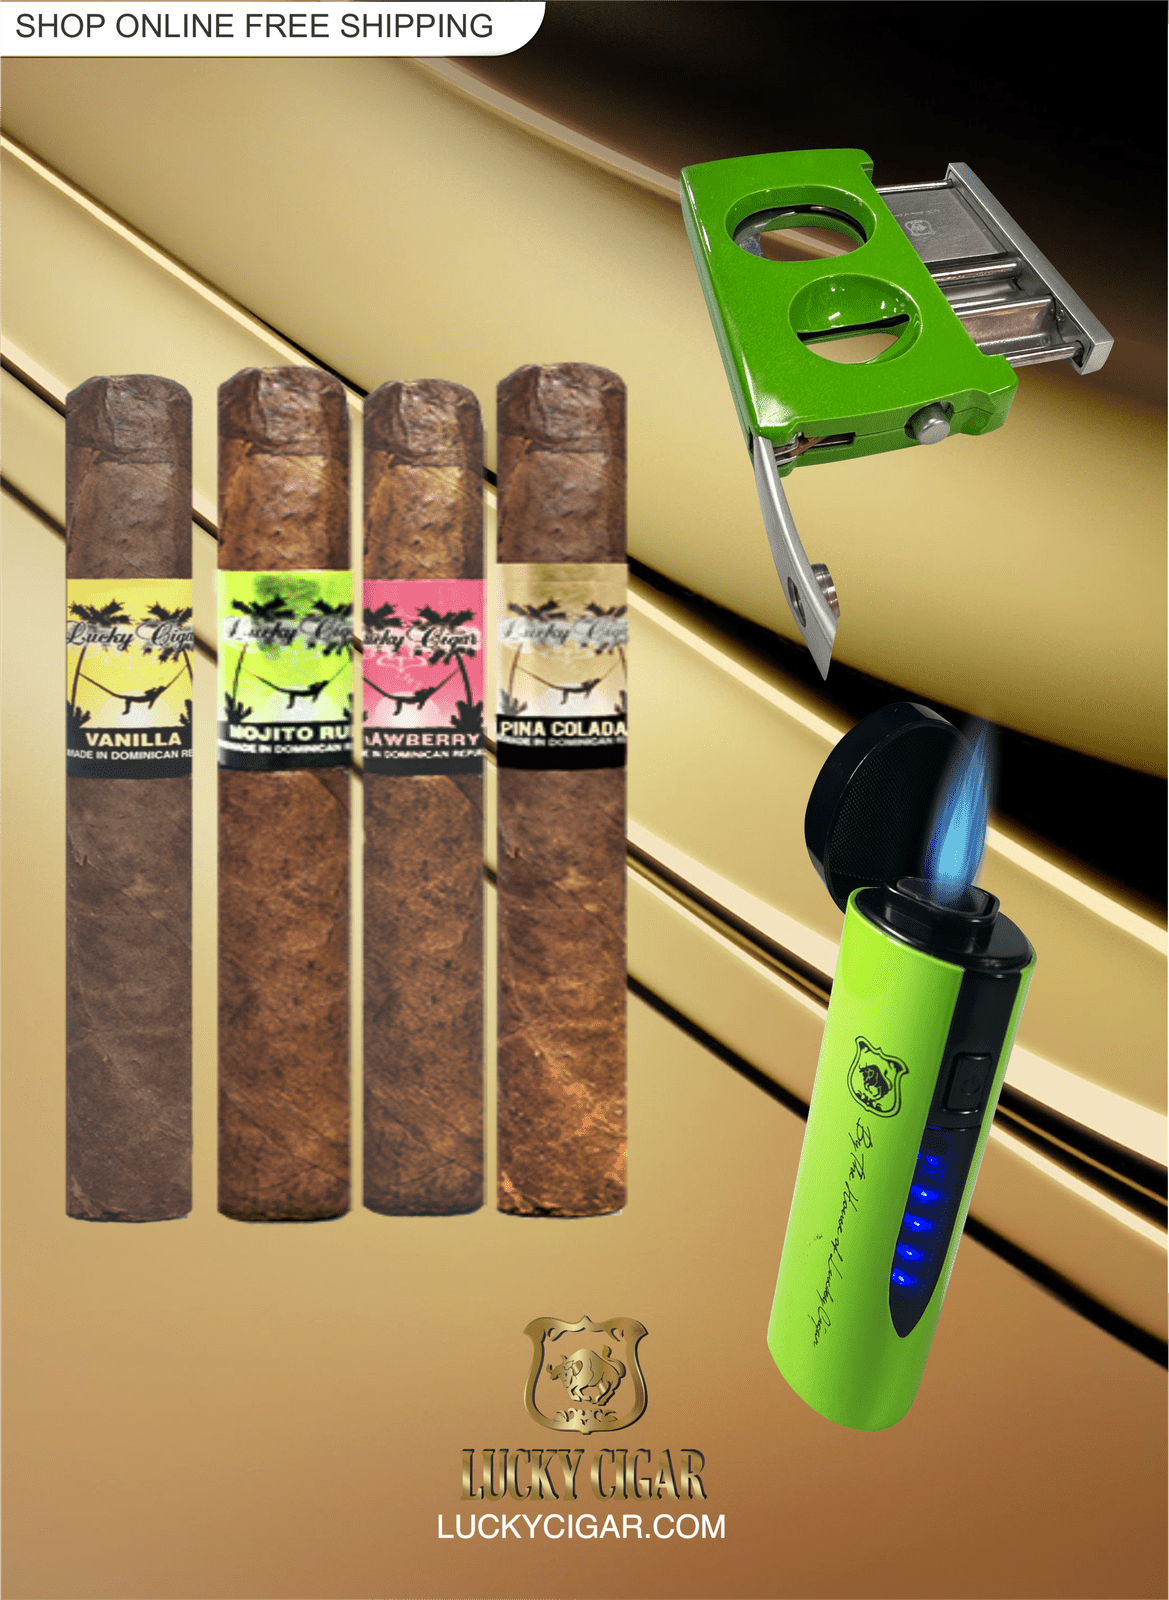 Lucky Cigar Sampler Sets: Set of 4 Lucky Flavor Cigars with Cutter, Torch